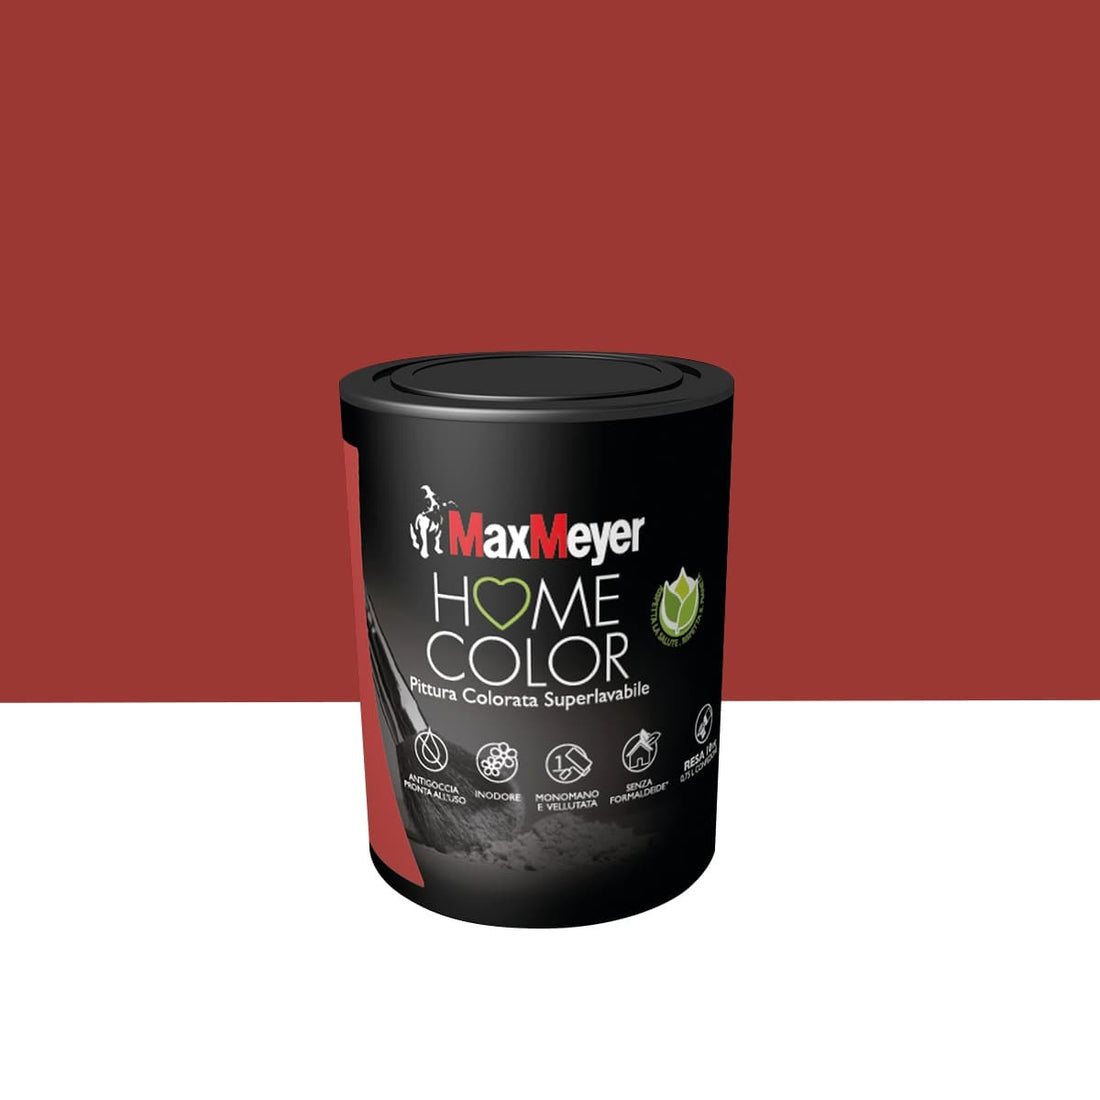 SCARLET RED SUPERWASHABLE PAINT HOME COLOUR 750 ML - best price from Maltashopper.com BR470003891